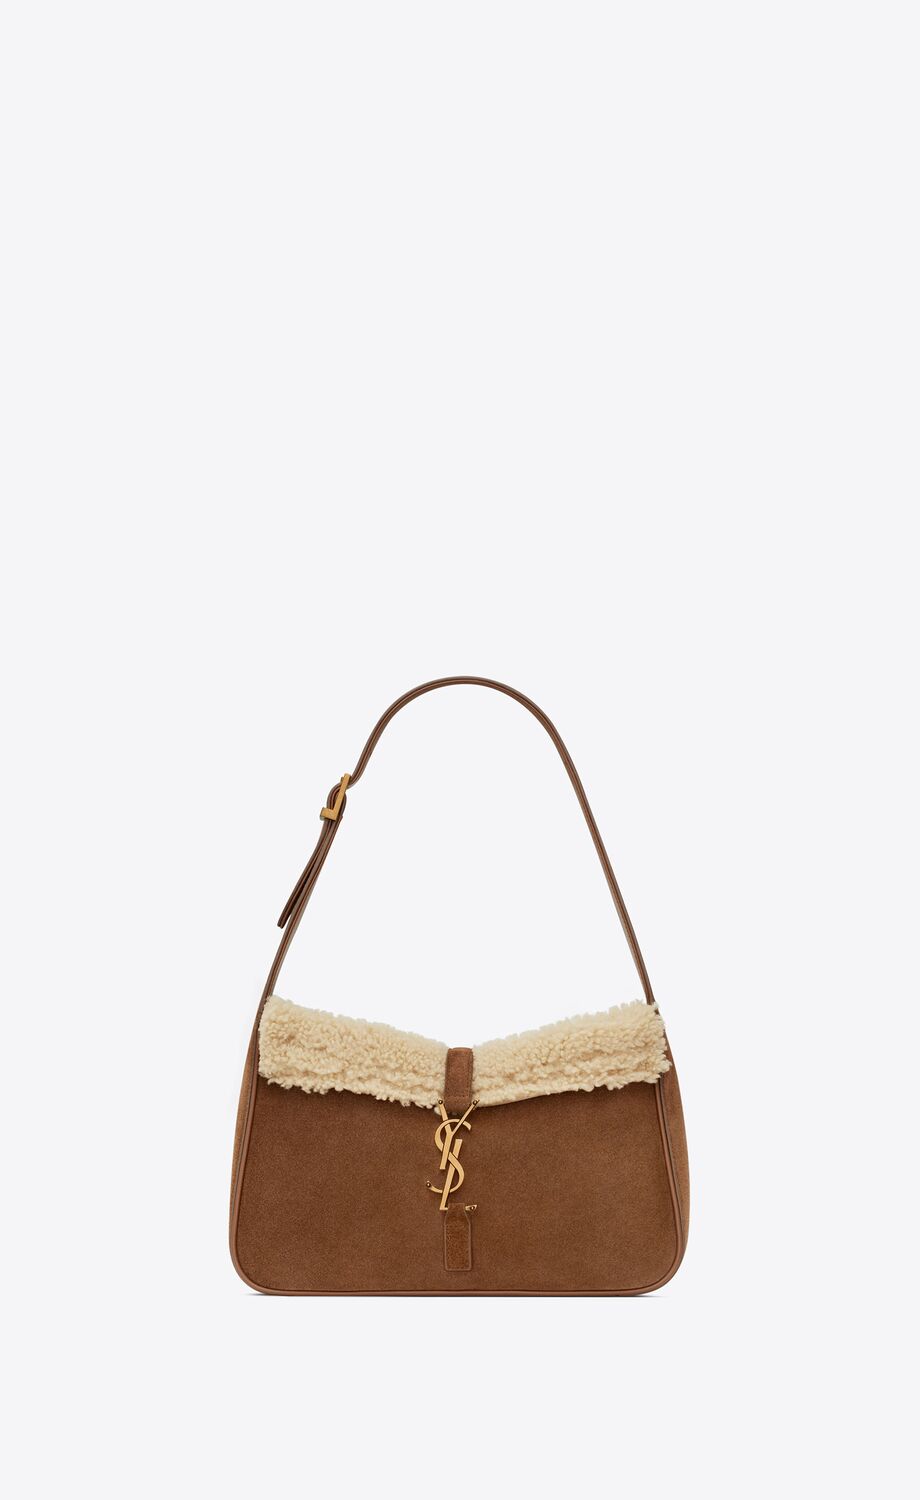 Le 5 à 7 hobo bag in SUEDE AND SHEARLING | Saint Laurent | YSL.com